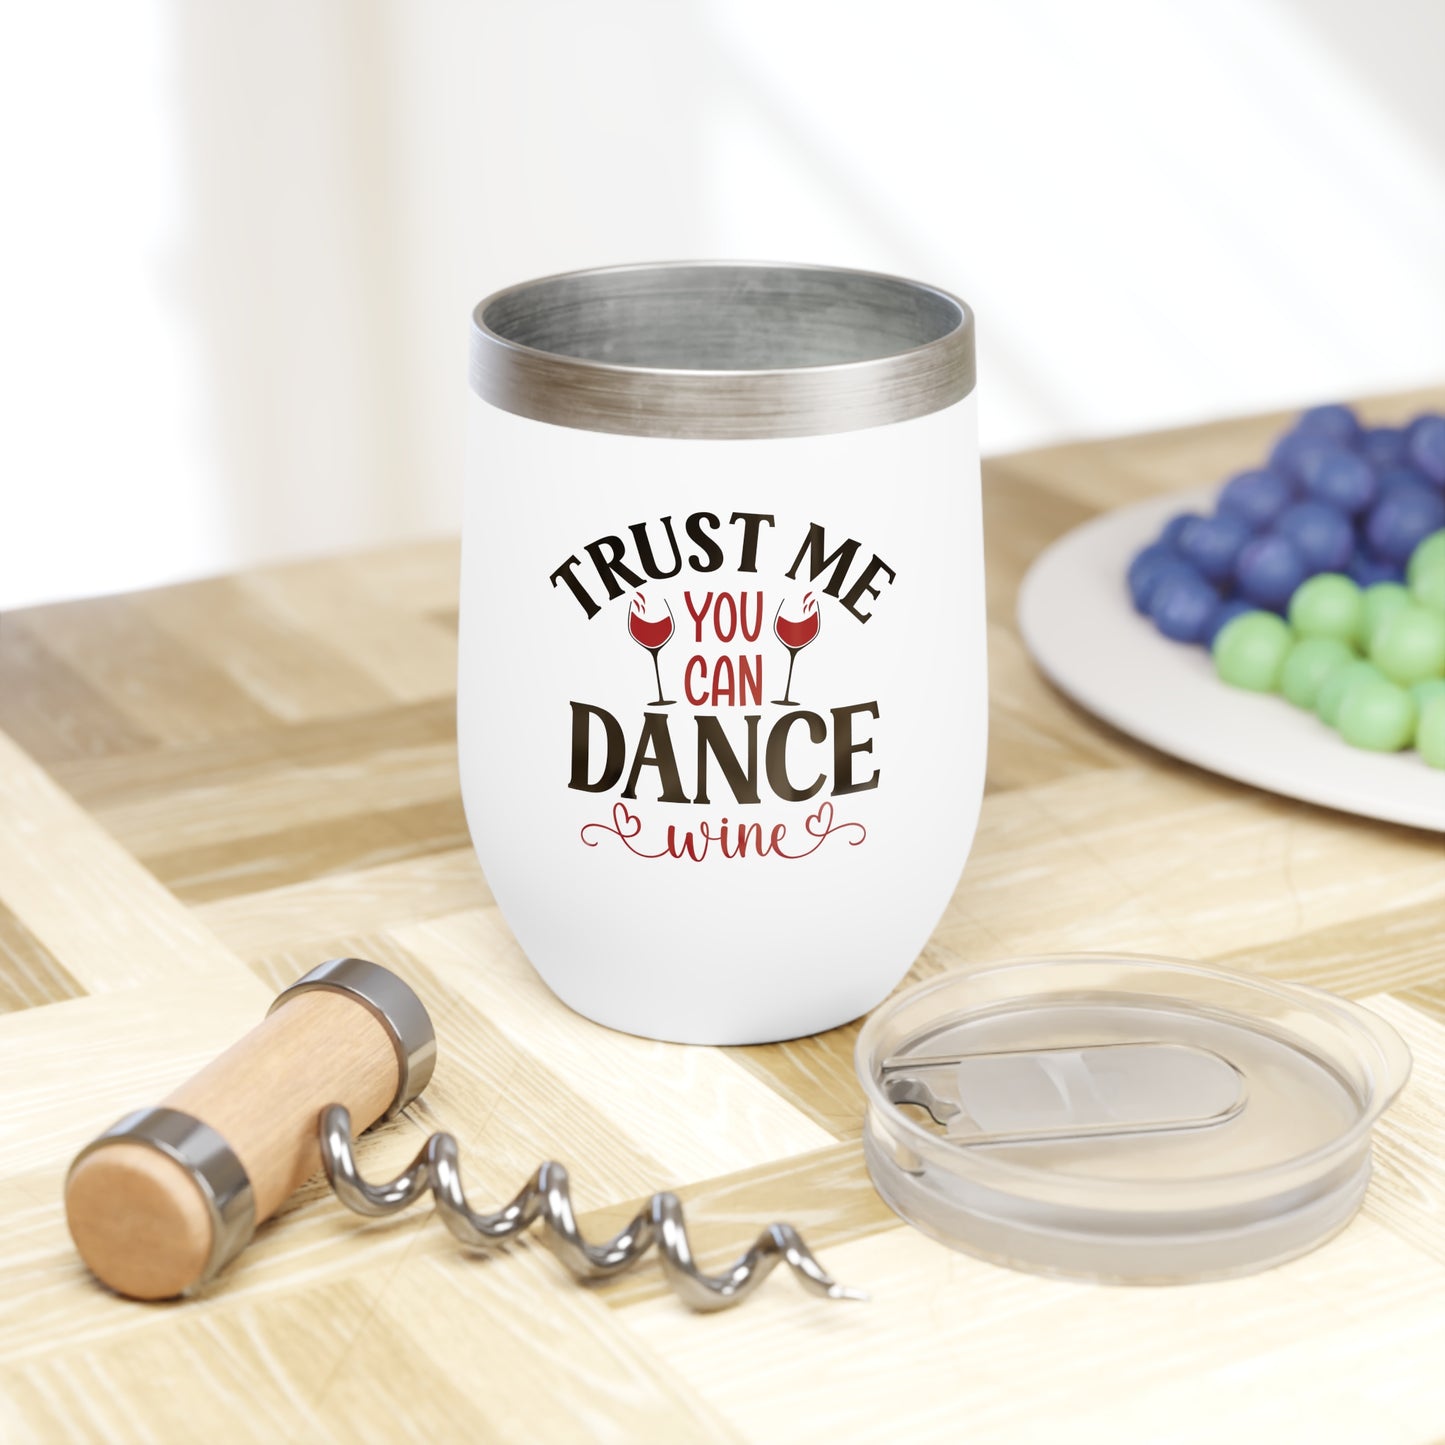 Trust Me You Can Dance - Chill Wine Tumbler